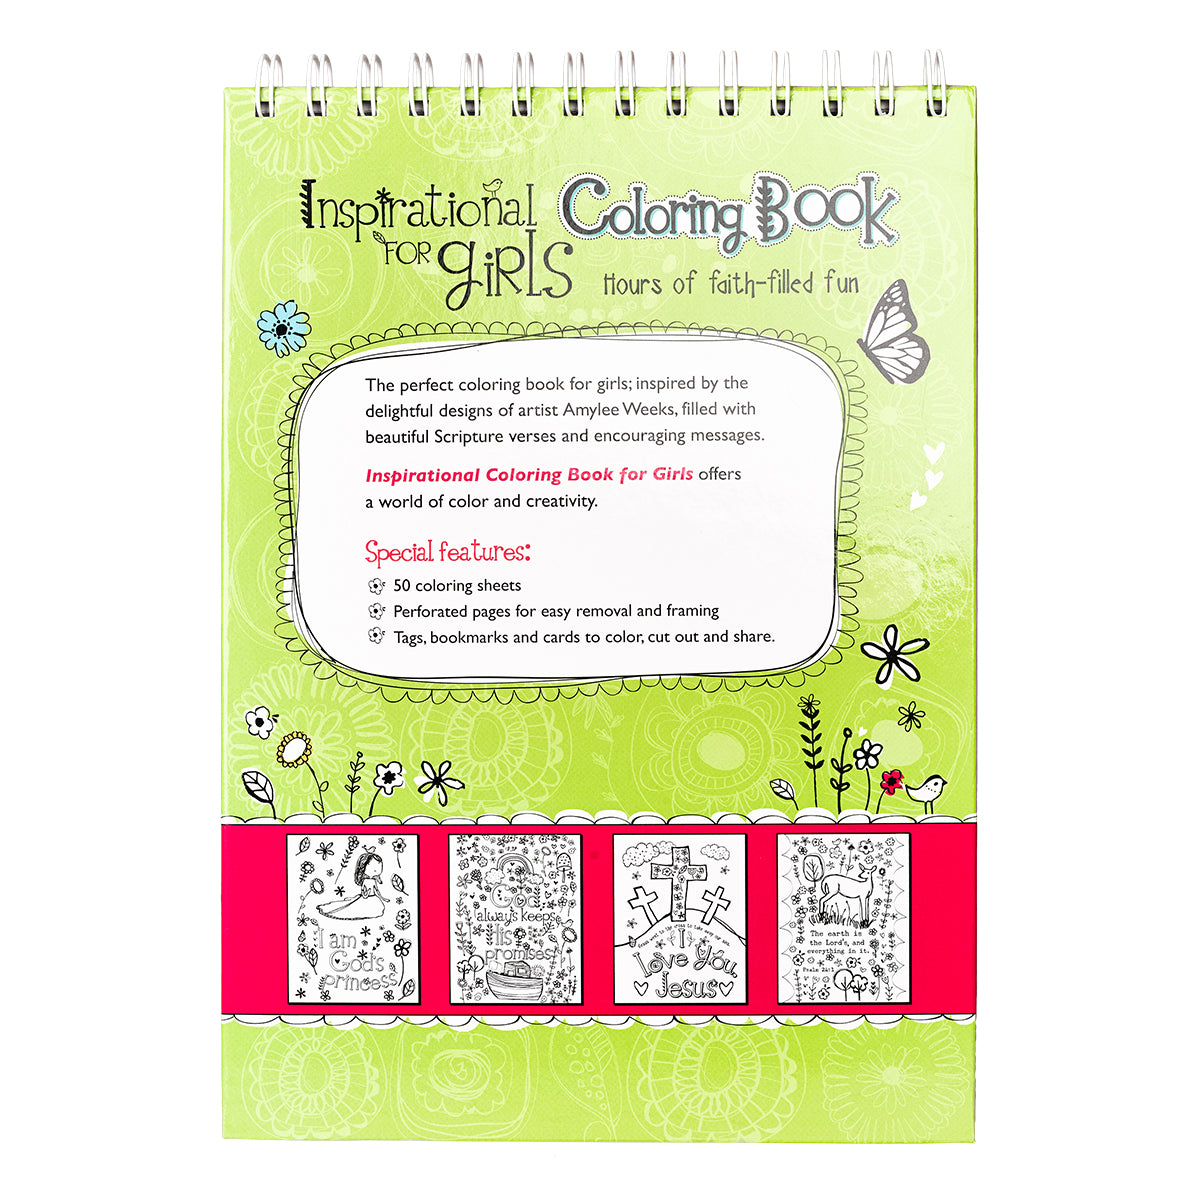 Company　Book　Girls　For　Inspirational　Christian　Gift　Coloring　The